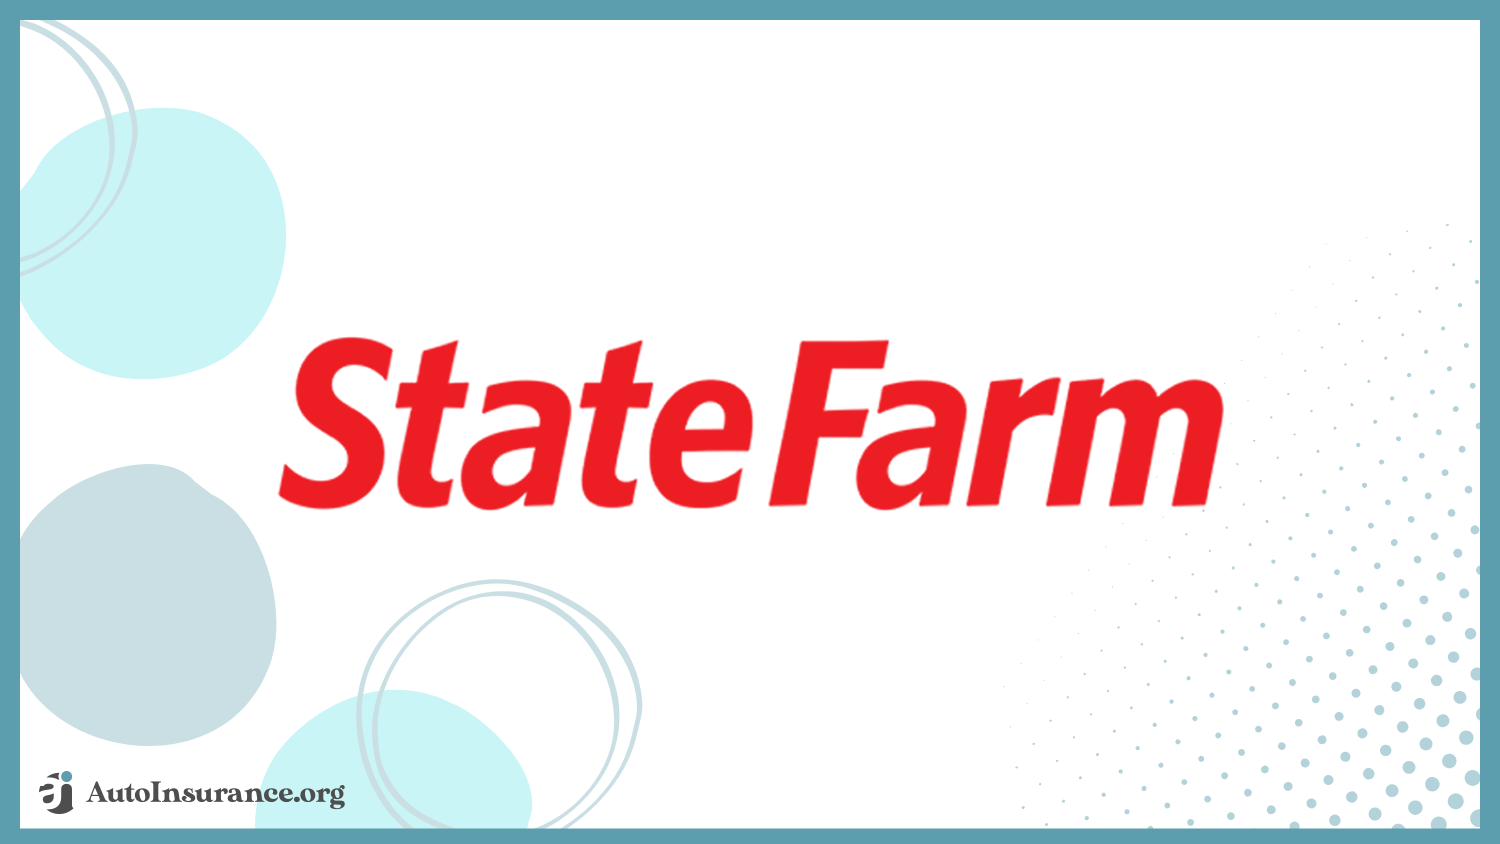 State Farm: Best Auto Insurance for Limousines